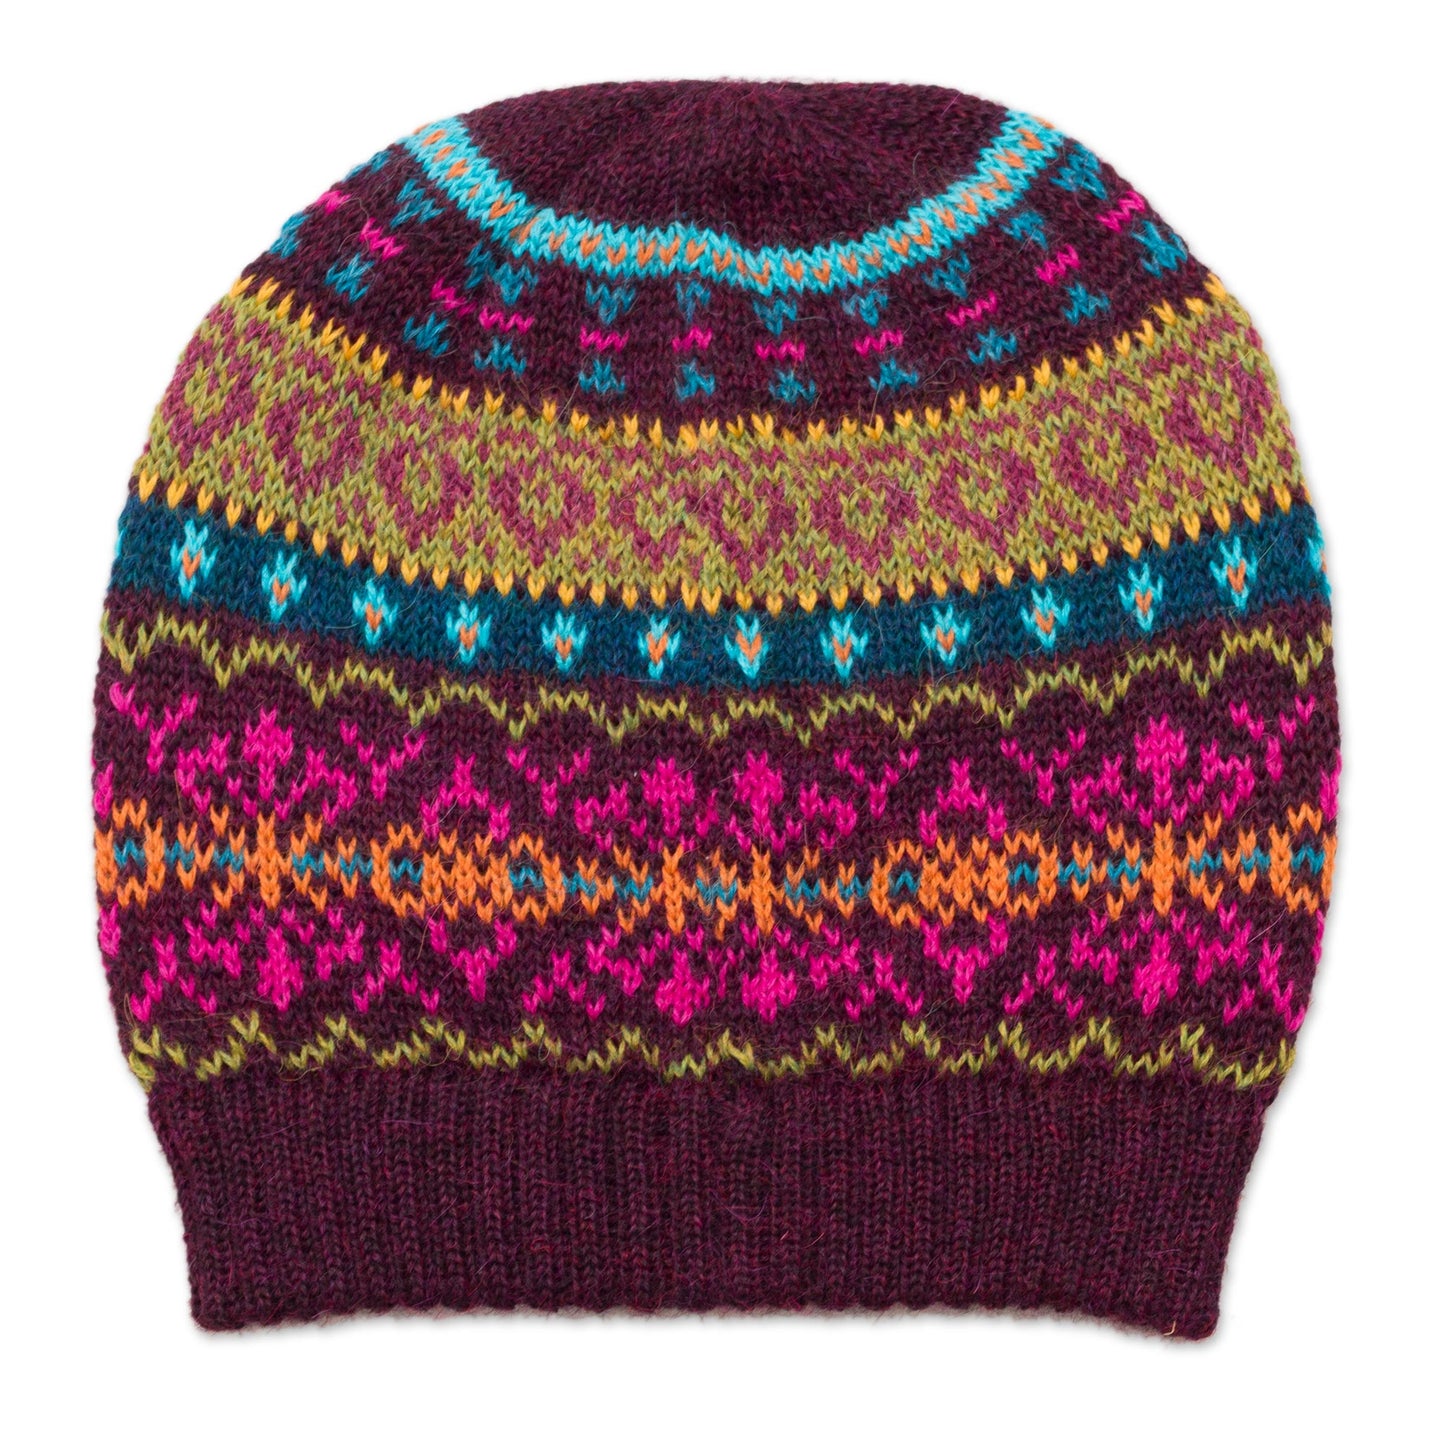 Colorful Carousel Multi-Color 100% Alpaca Knit Hat with Rows of Varying Motifs